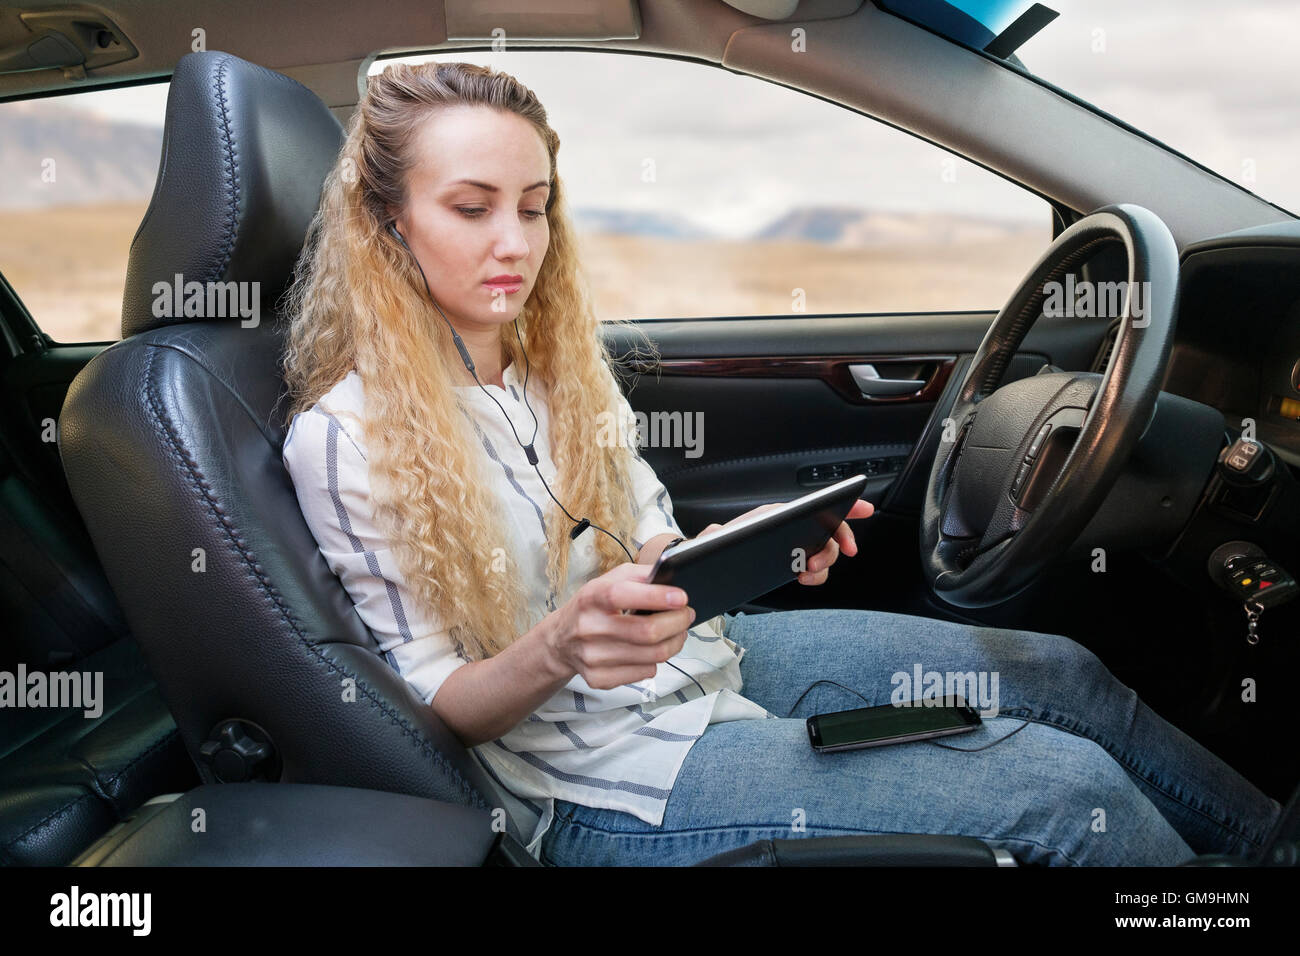 Woman sitting in car and using tablet Stock Photo